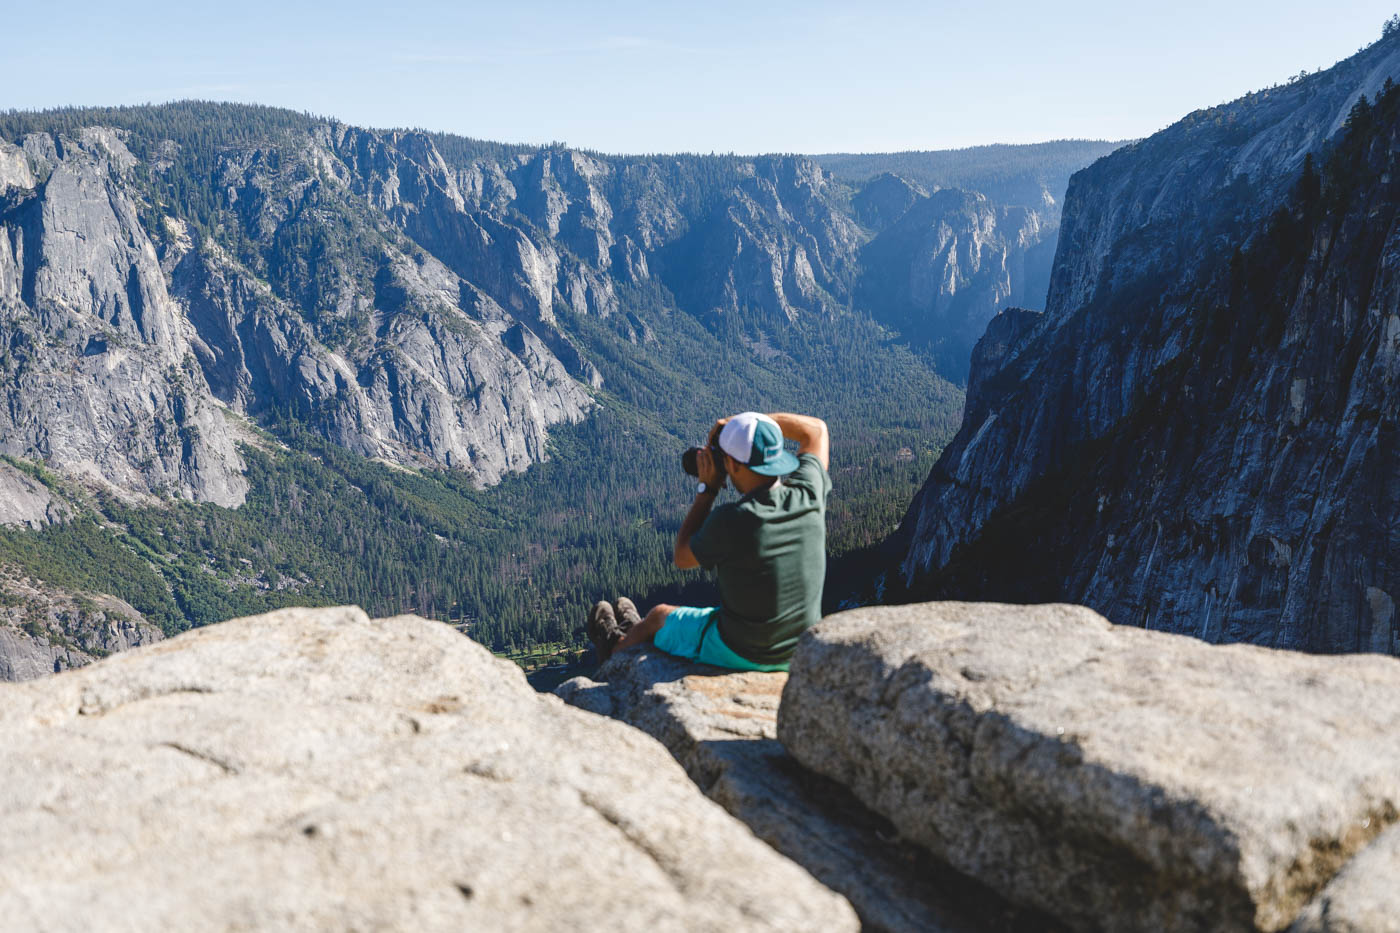 Garrett sitting at the top of the Upper Yosemite trail taking photos of the views over the national park.